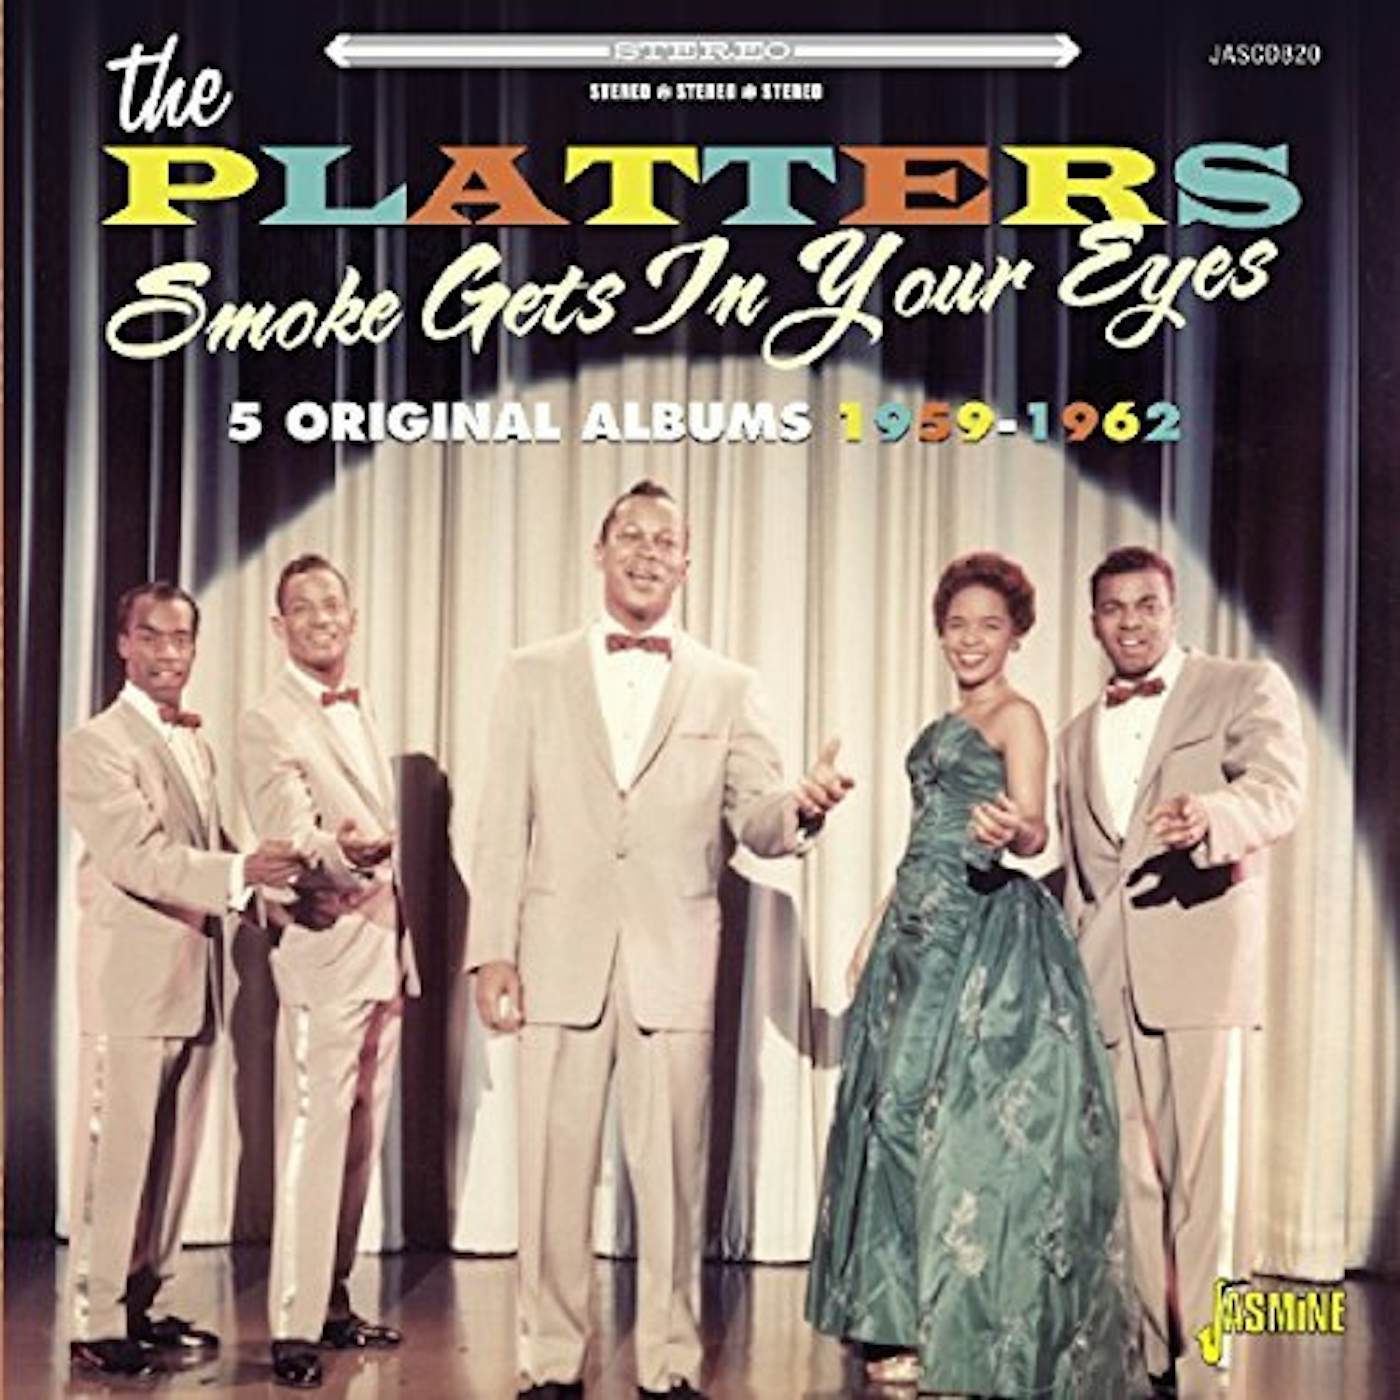 The Platters SMOKE GETS IN YOUR EYES: 5 ORIGINAL ALBUMS 1959-62 CD